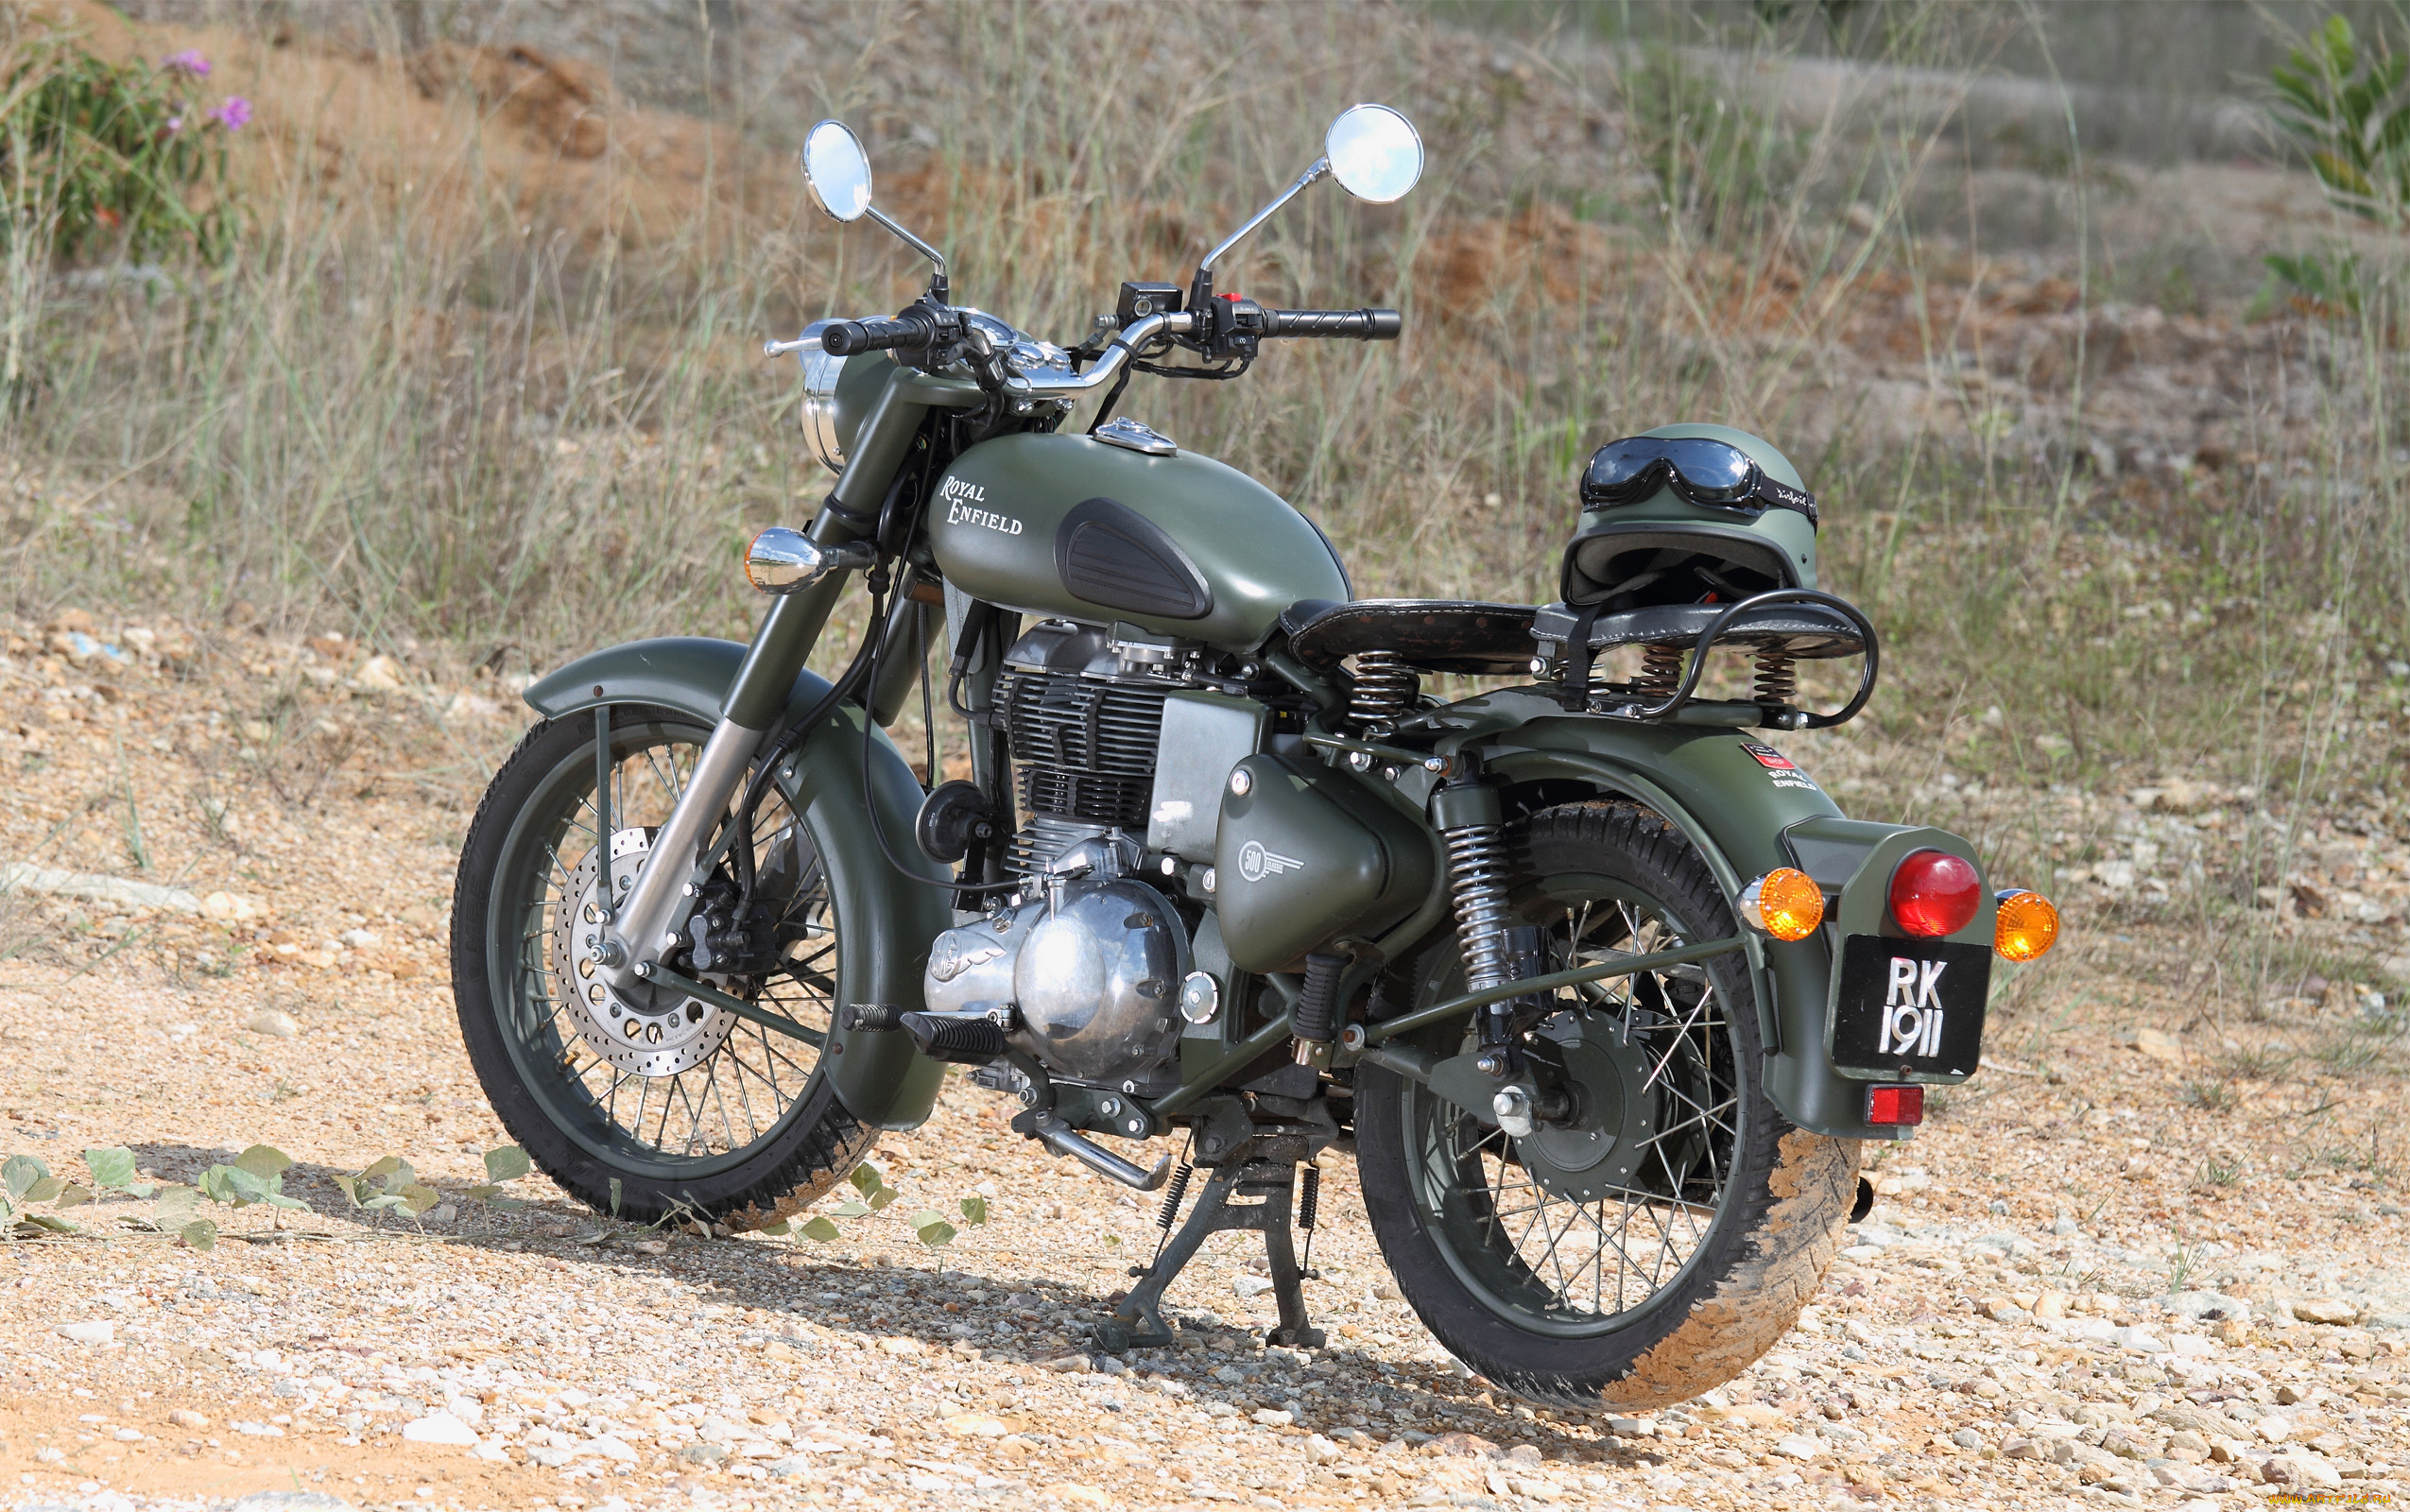 enfield 500 classic, , royal enfield, enfield